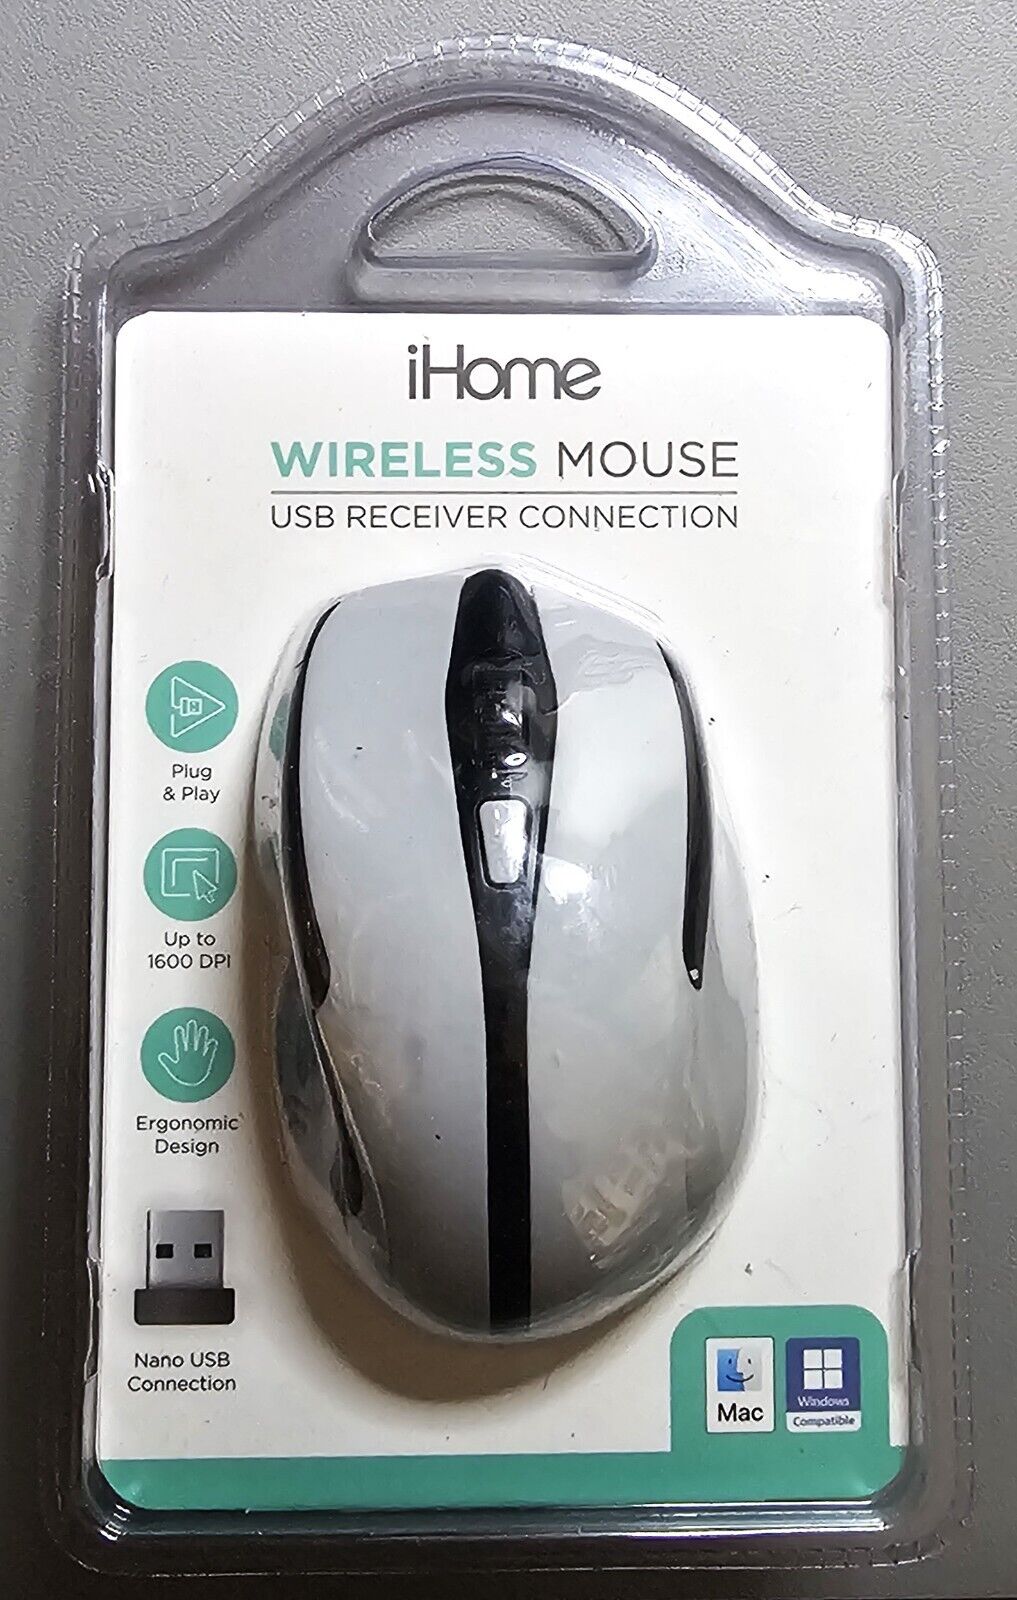 iHome 2.4G 6D Plug & Play 1600 DPI Wireless Mouse